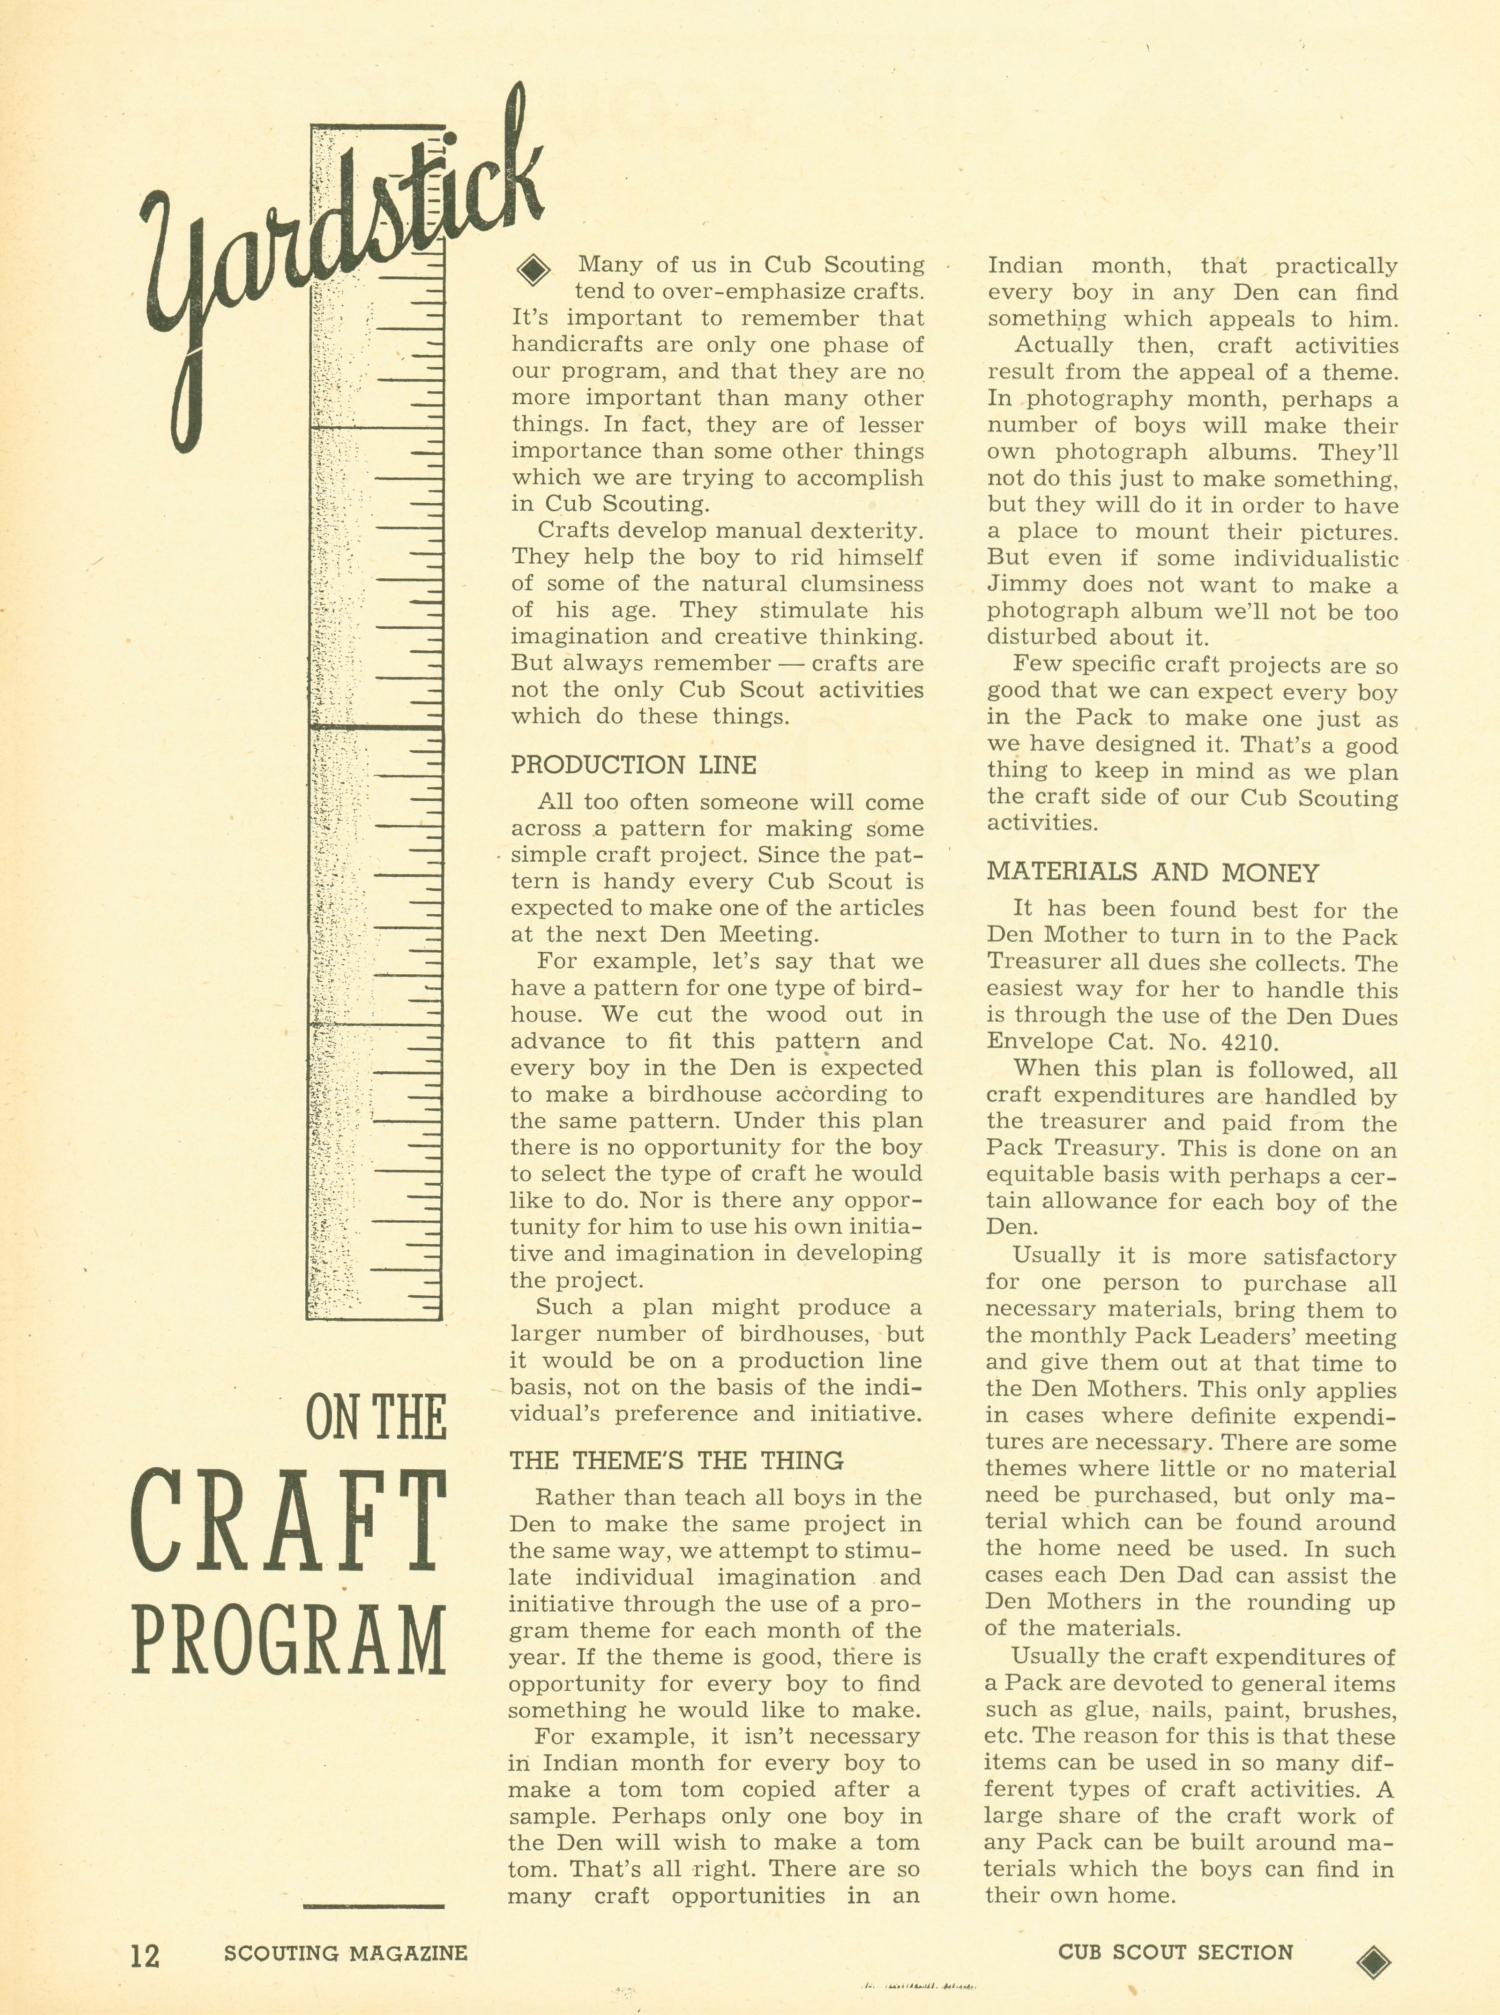 Scouting, Volume 38, Number 2, February 1950
                                                
                                                    12
                                                